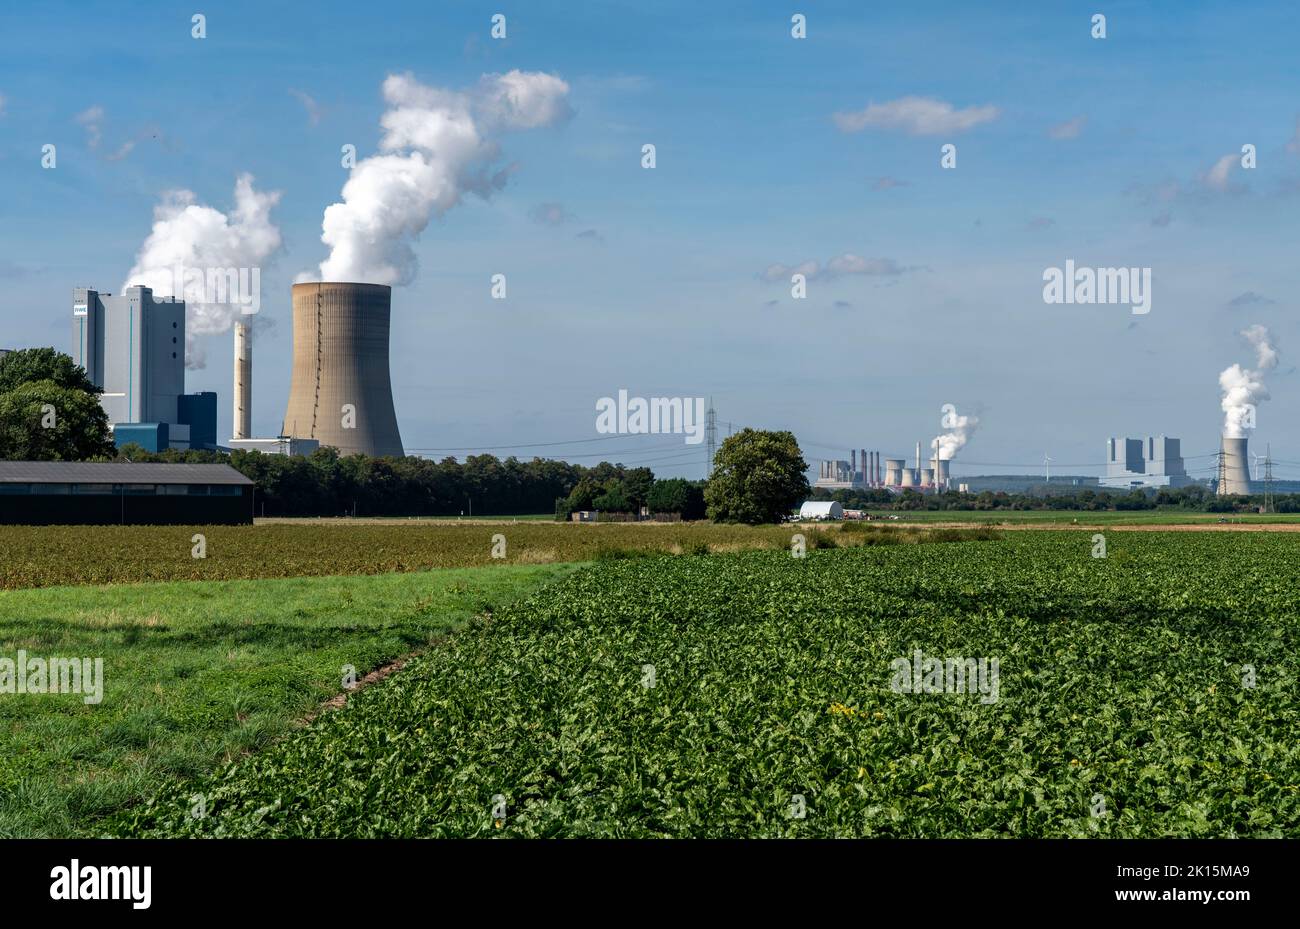 Lignite-fired power plant, RWE Power AG Niederaussem power plant and Neurath power plant at the rear, 2 units shut down in 2020/21 and restarted in Ju Stock Photo